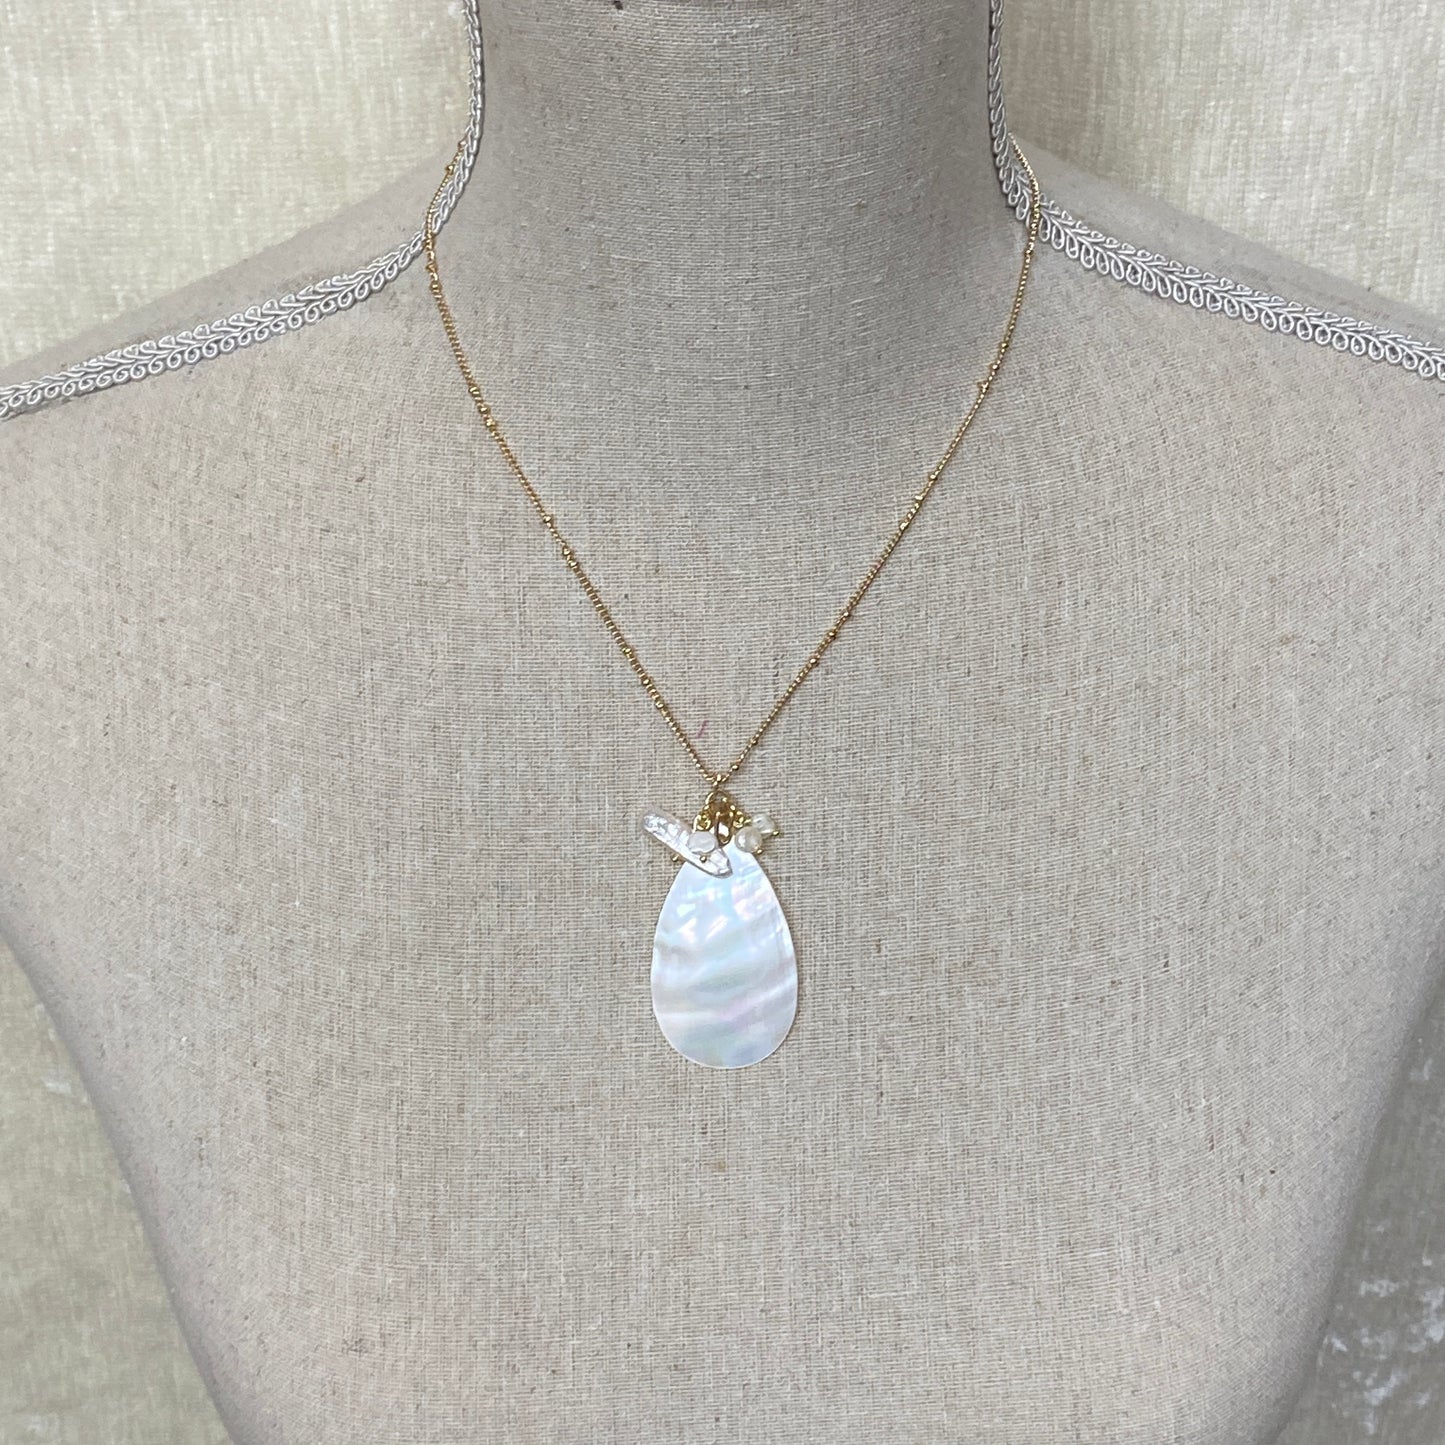 Mother of Pearl, Teardrop Shell Pendant Necklace with Freshwater Pearls. Seaside , Natural theme, White Shell Necklace